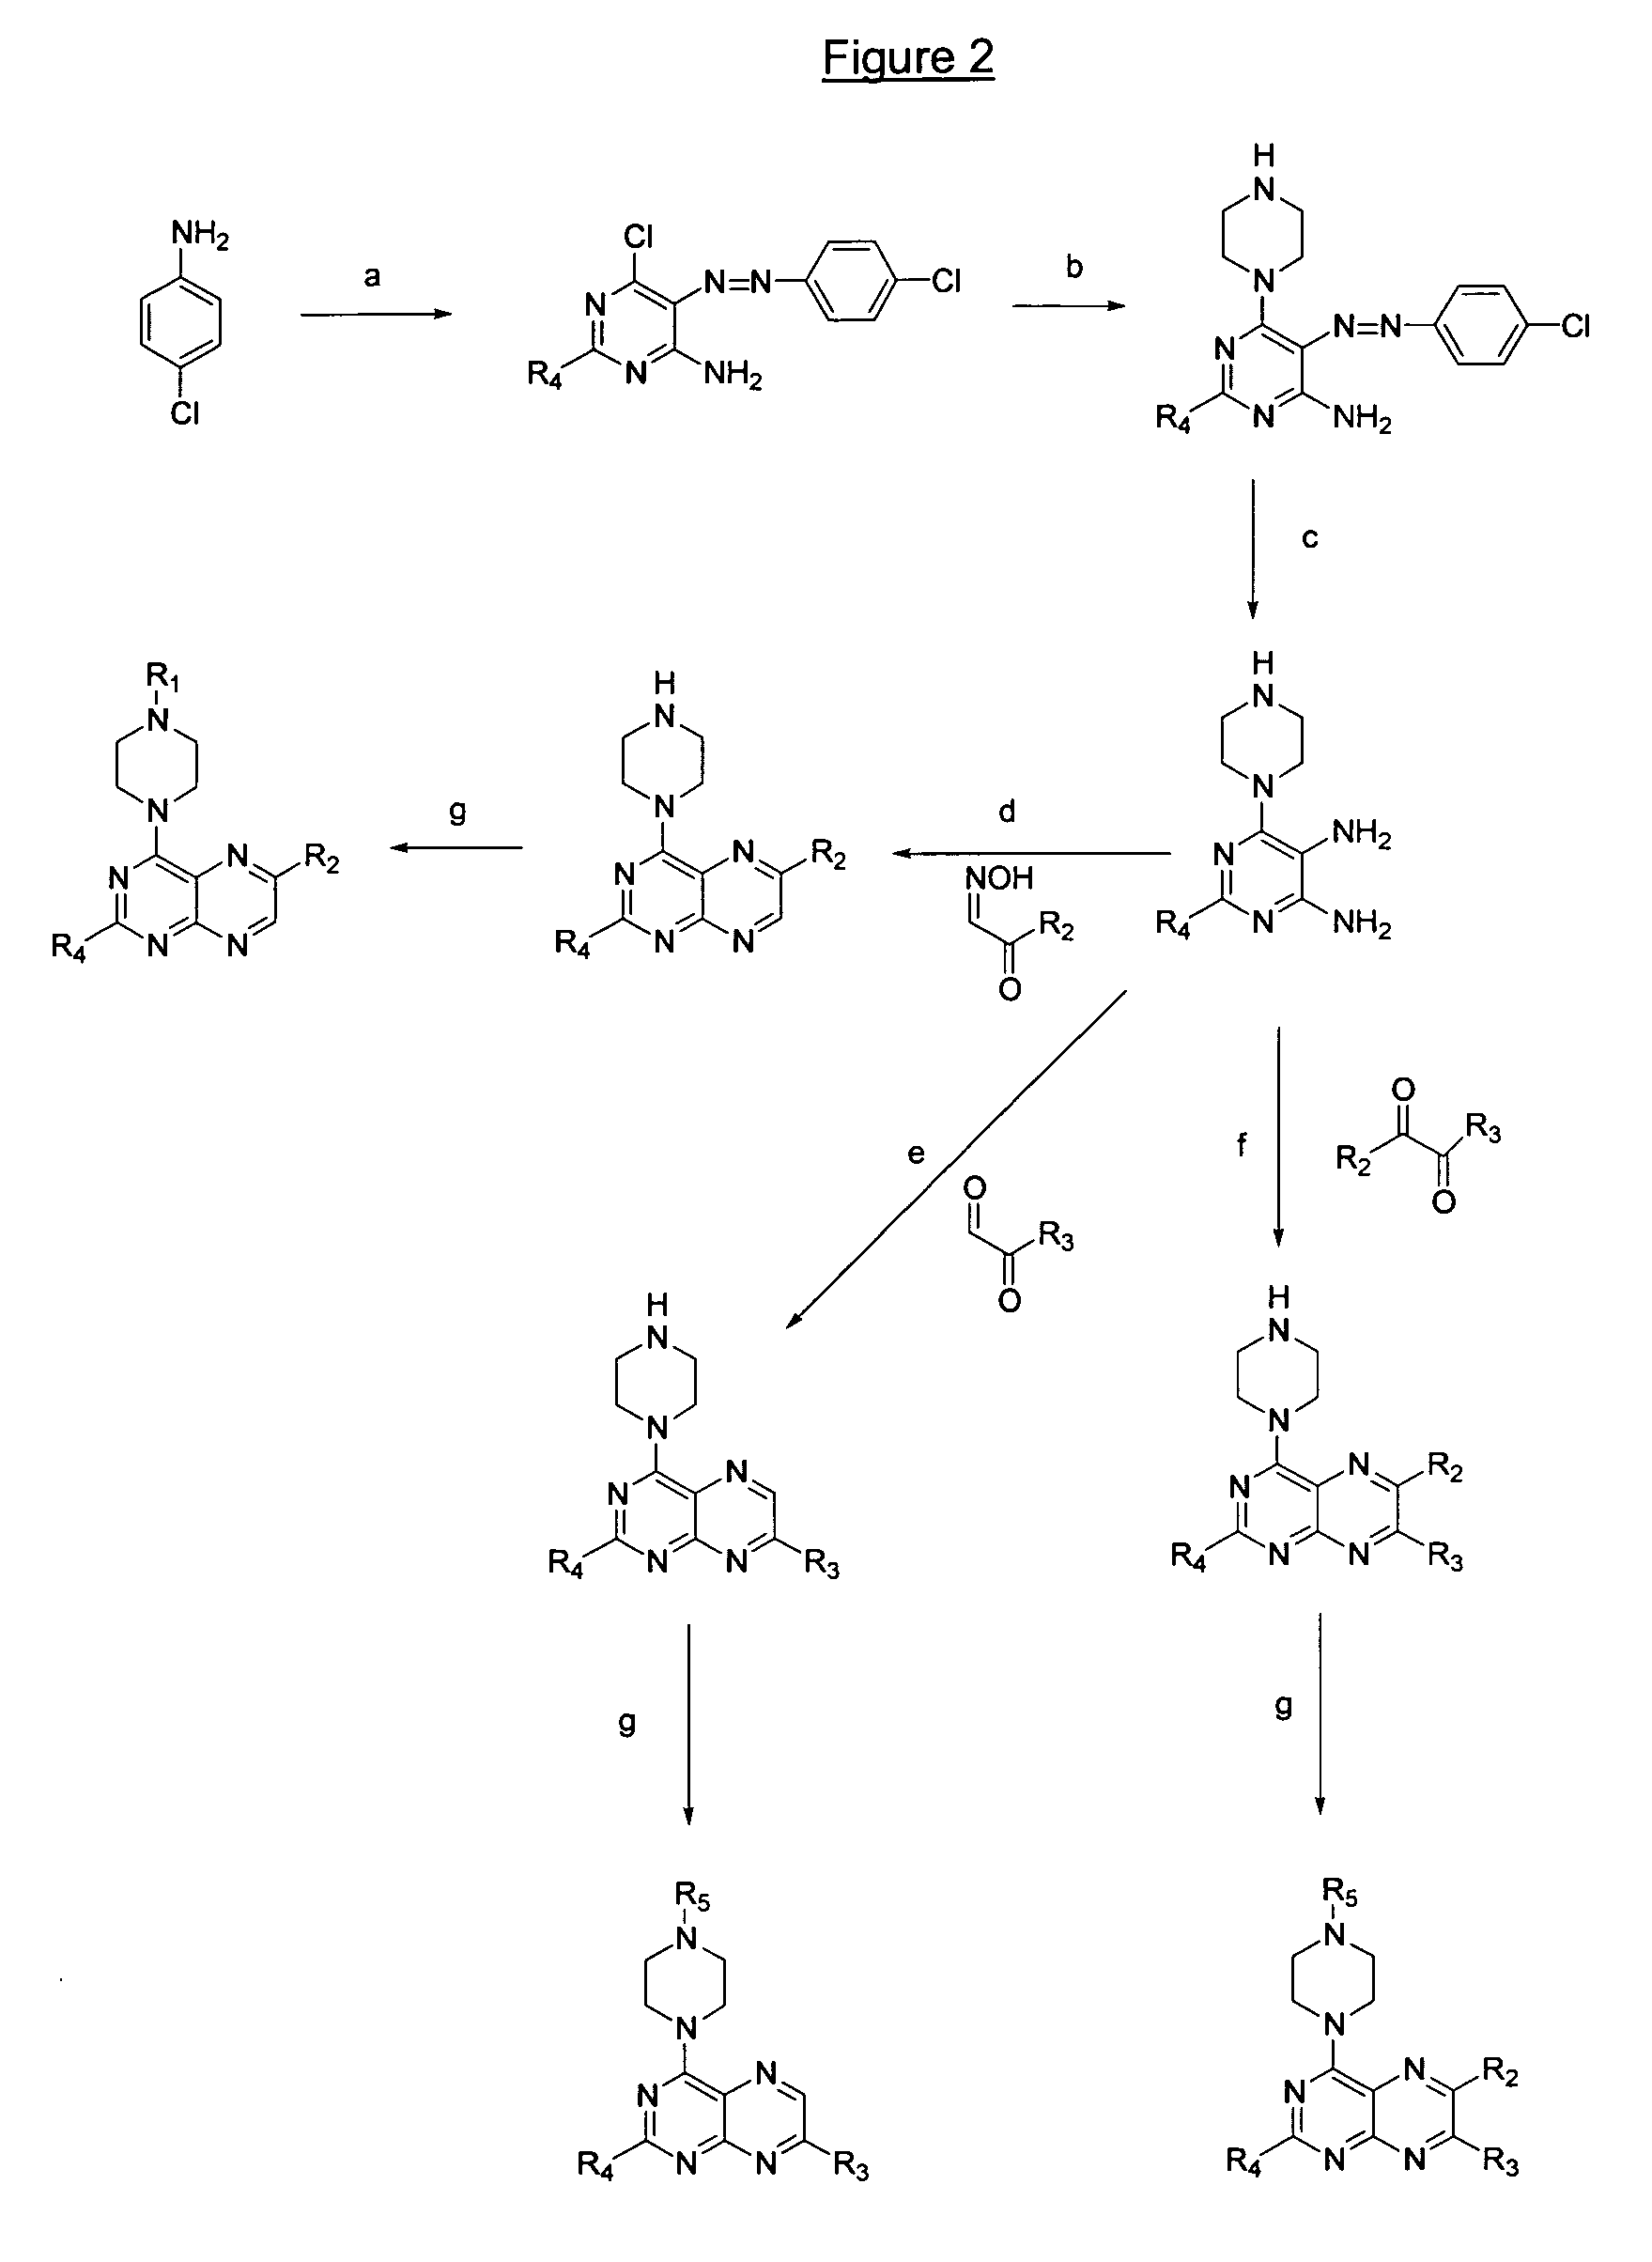 Pteridine derivatives useful for making pharmaceutical compositions